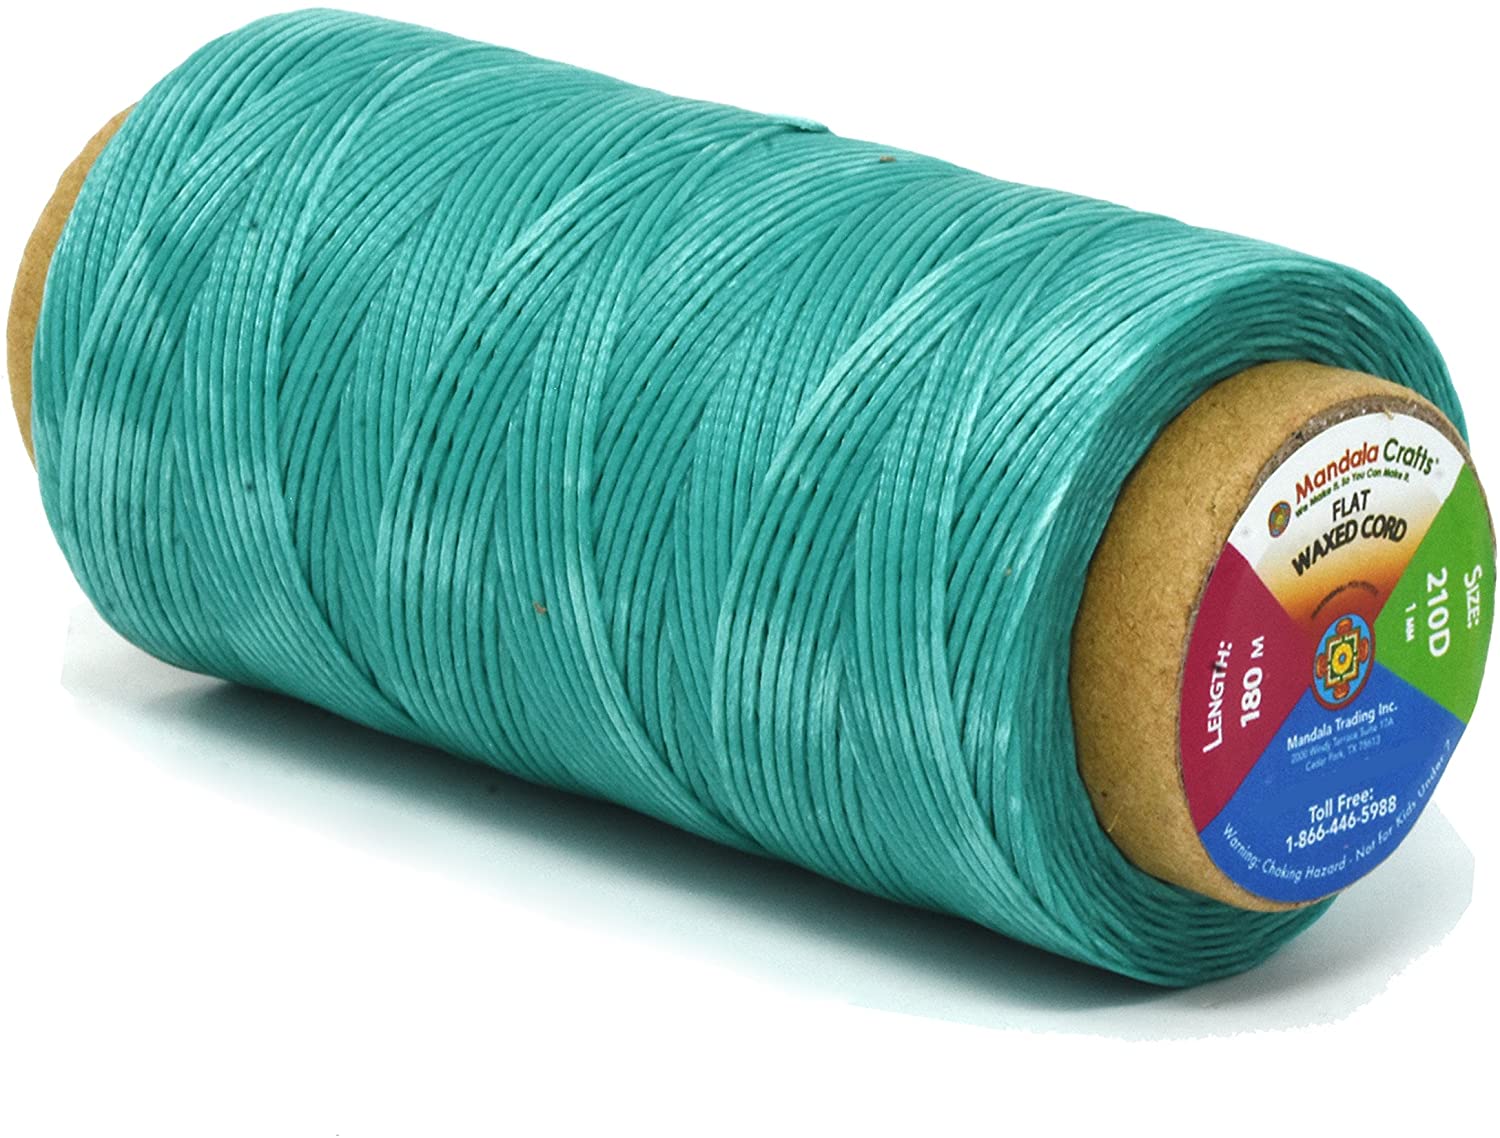 Flat Waxed Thread for Leather Sewing - Leather Thread Wax String Polyester Cord for Leather Craft Stitching Bookbinding by Mandala Crafts 210D 1mm 197 Yards Aquamarine